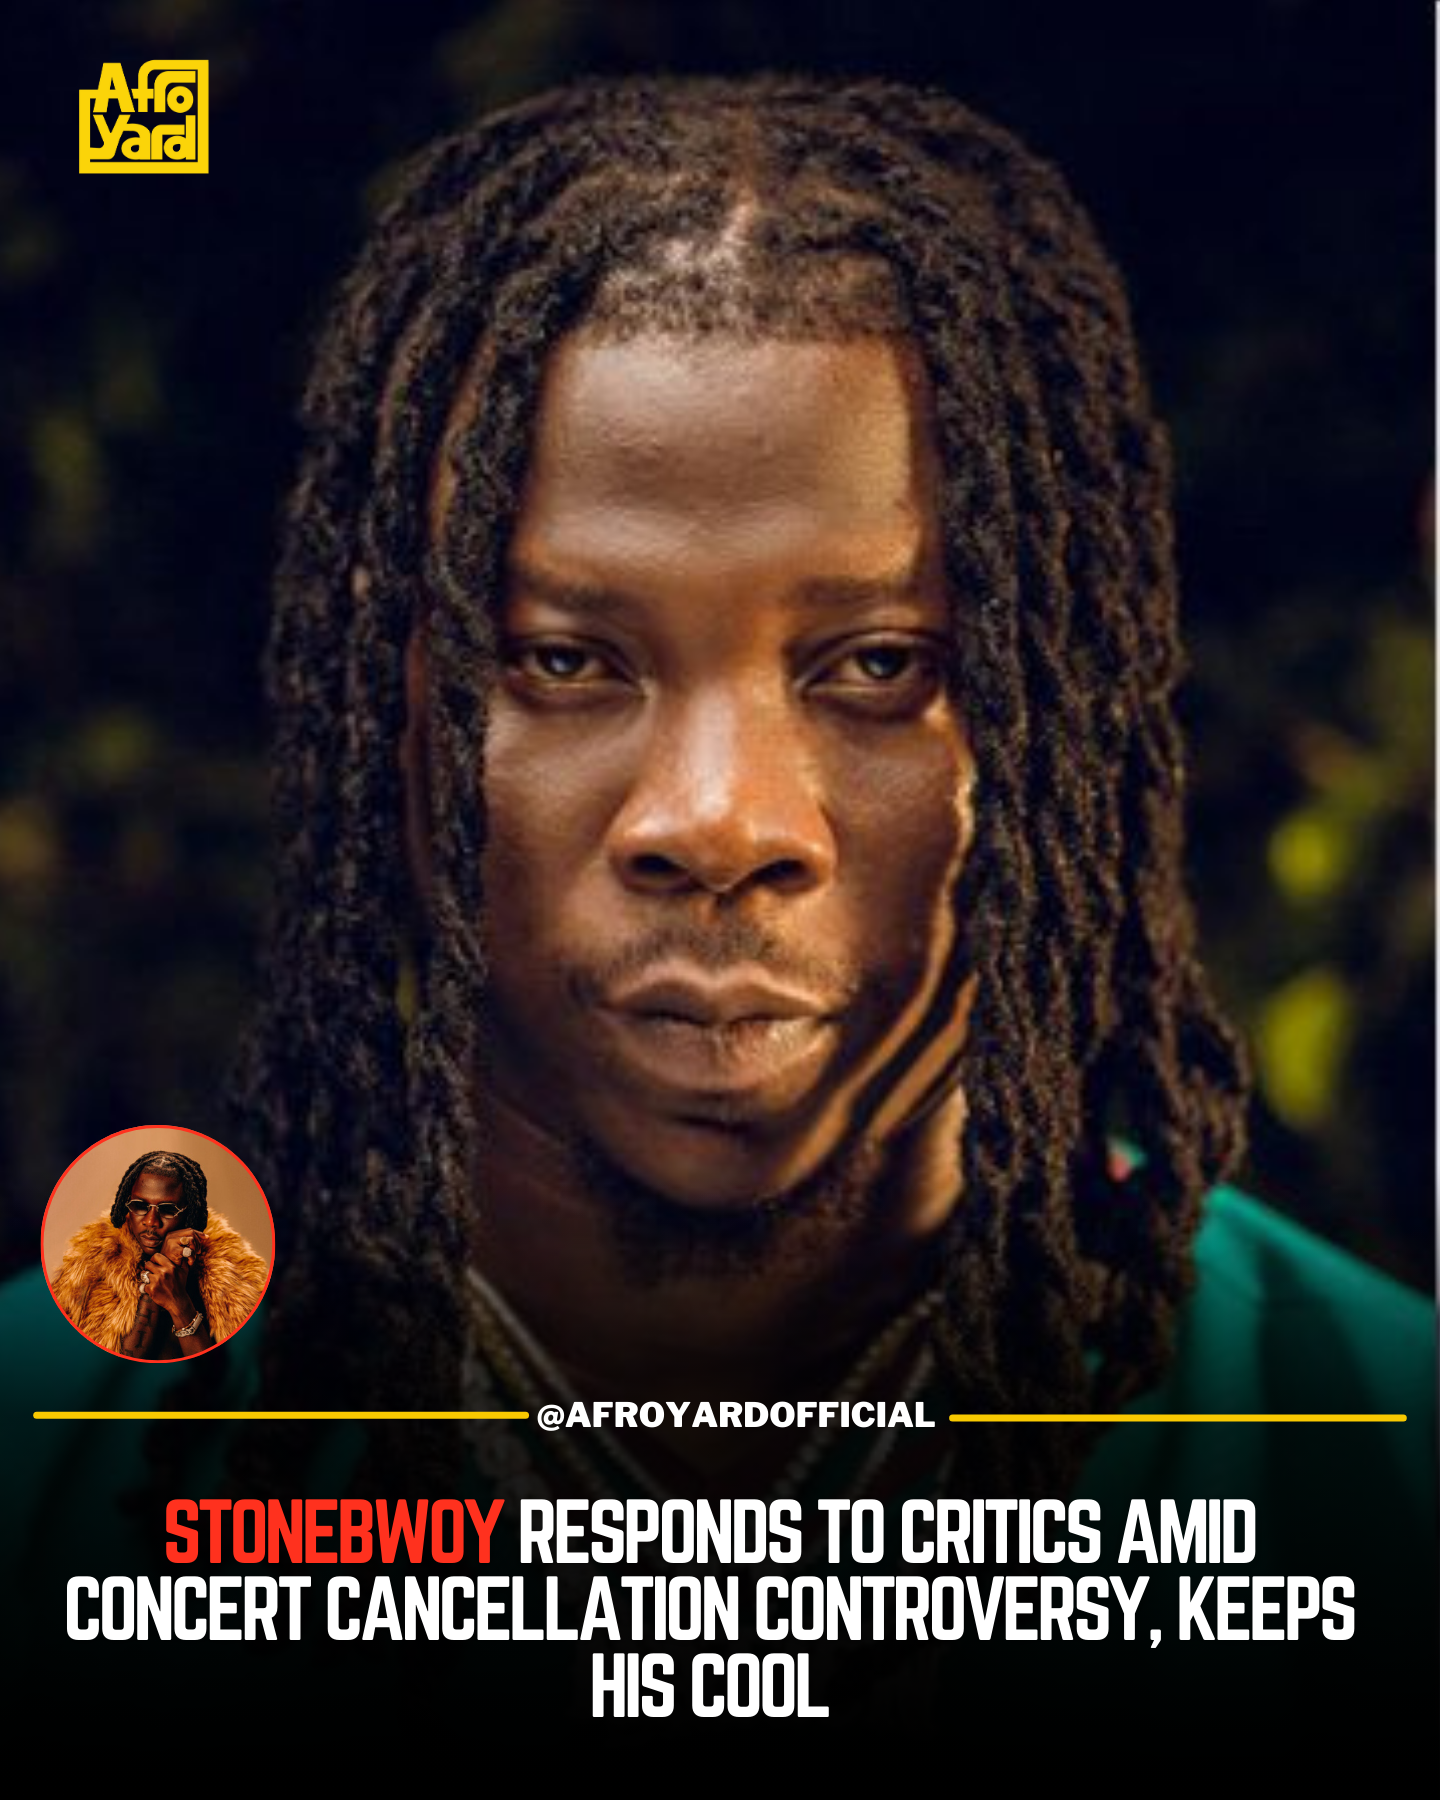 Stonebwoy Responds to Critics Amid Concert Cancellation Controversy